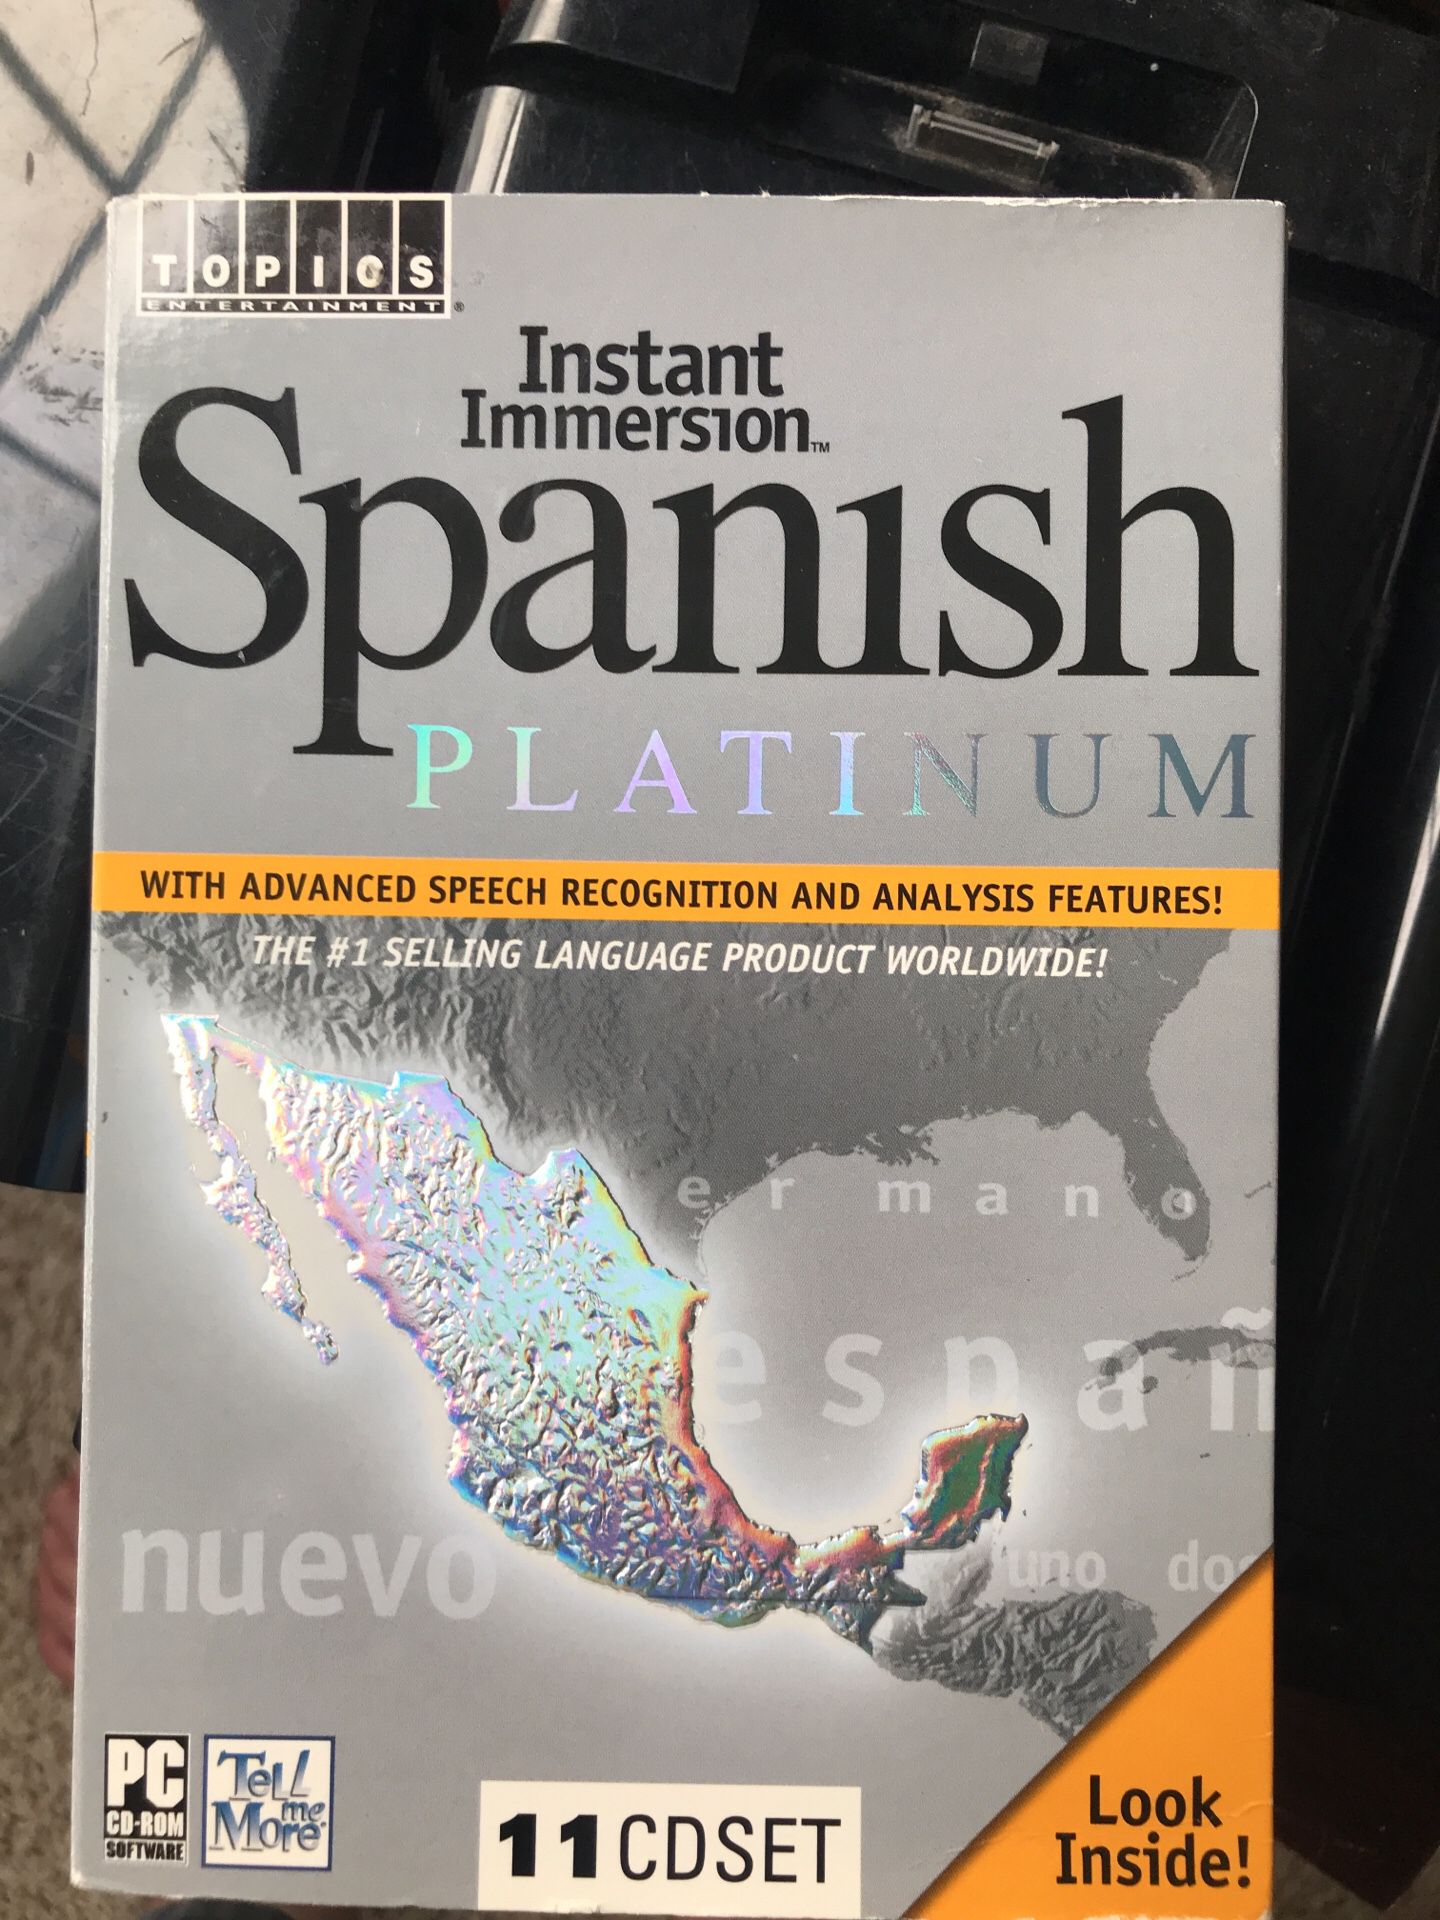 Spanish-learning software